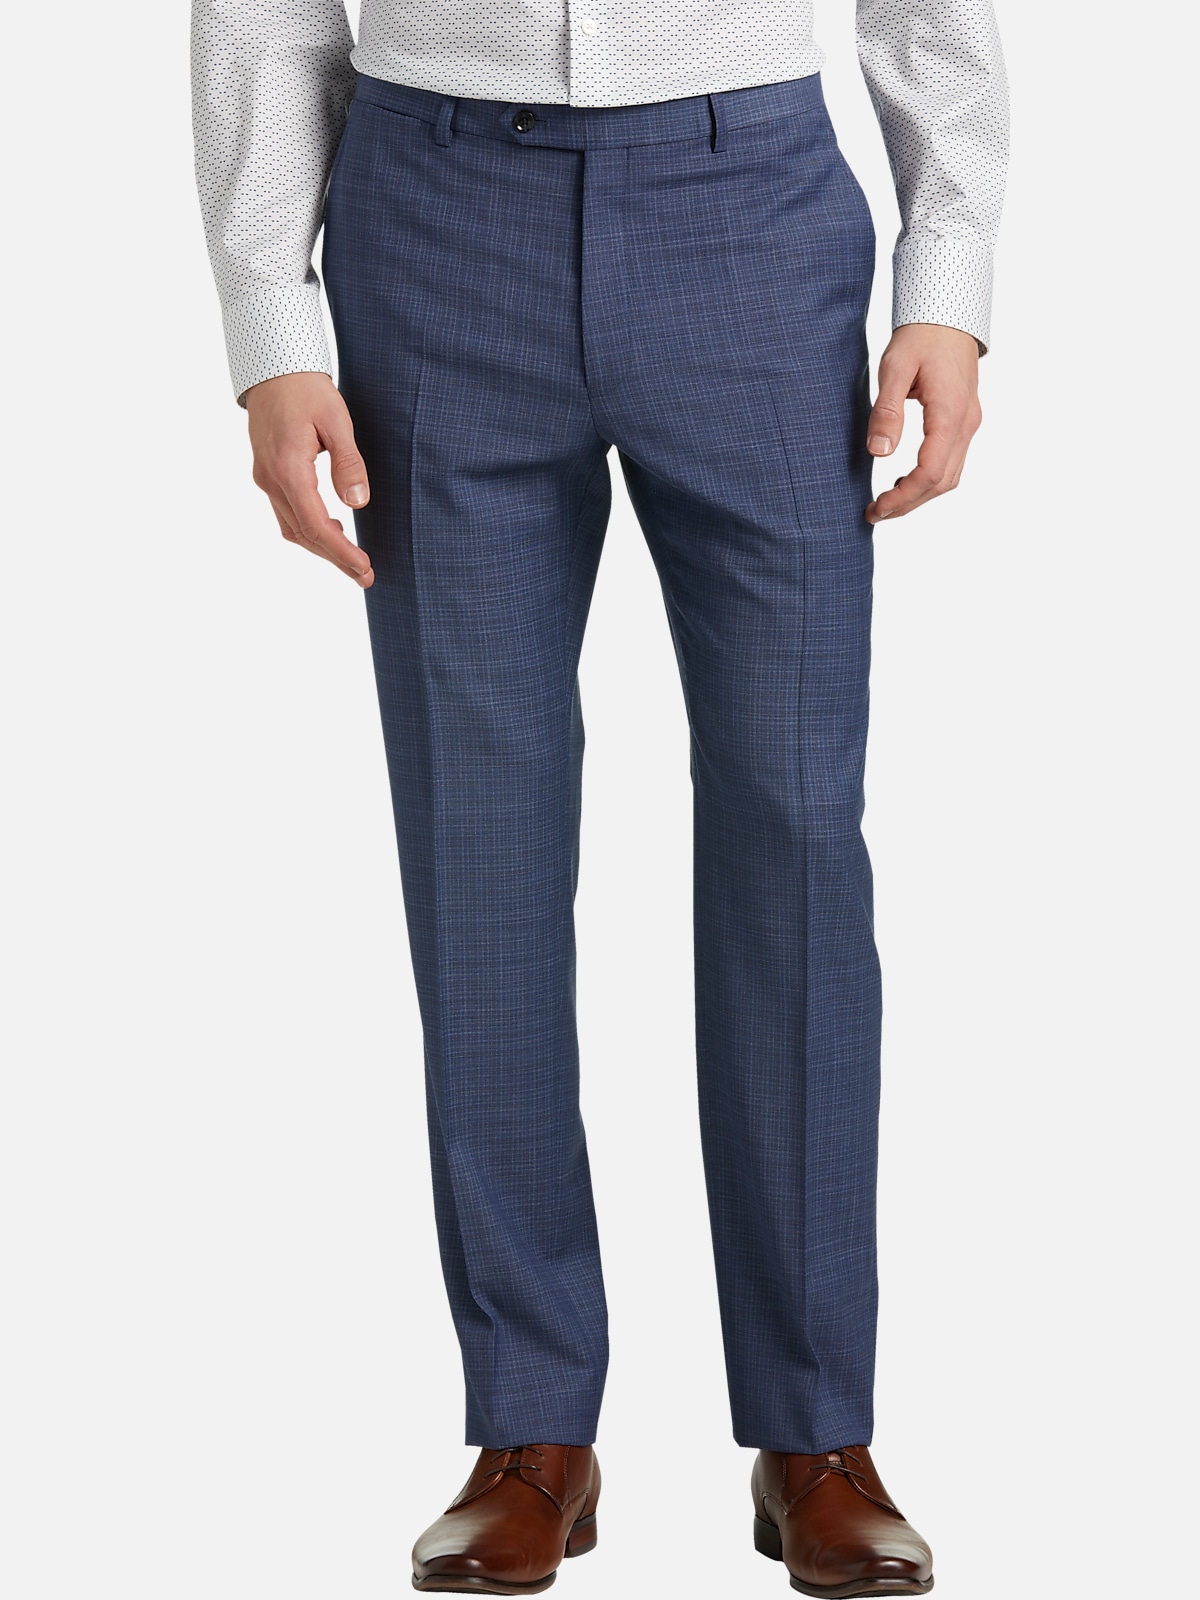 Tommy Hilfiger Modern Fit Suit Separates Pants | All Clearance $39.99 ...